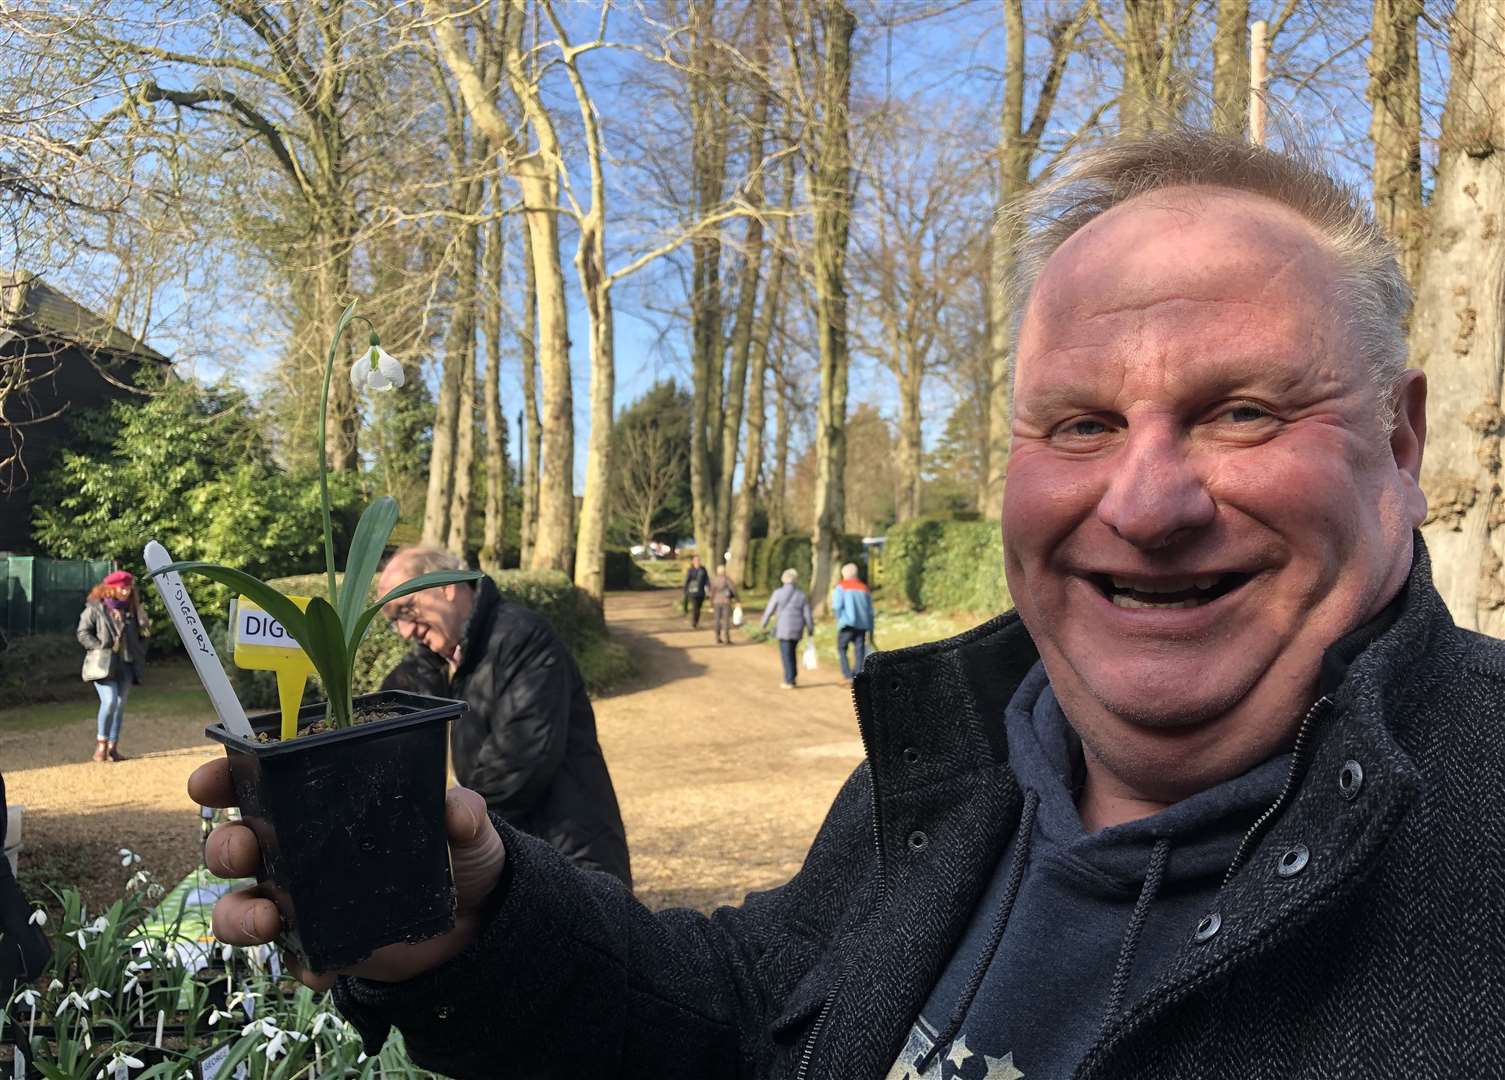 Neil Miller from Hever Castle bags a snowdrop